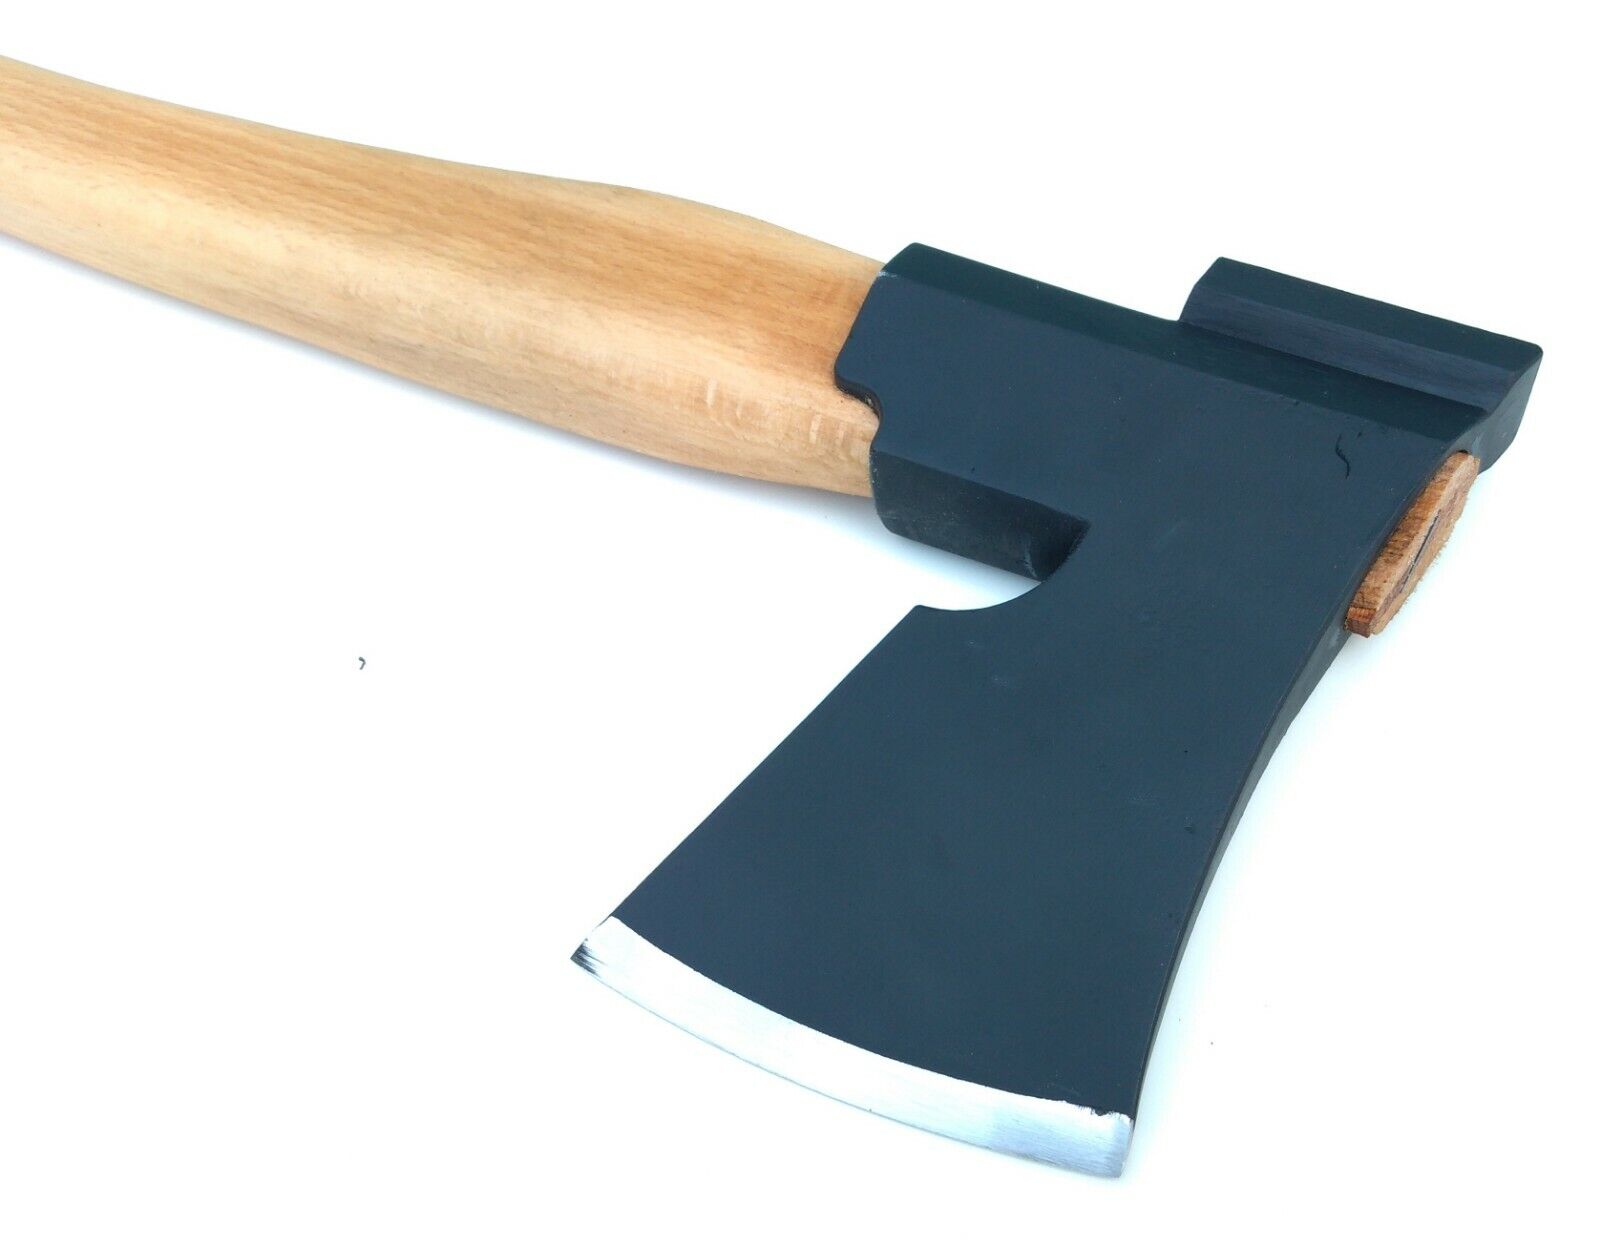 ※ Finnish type universal axe by mapsyst